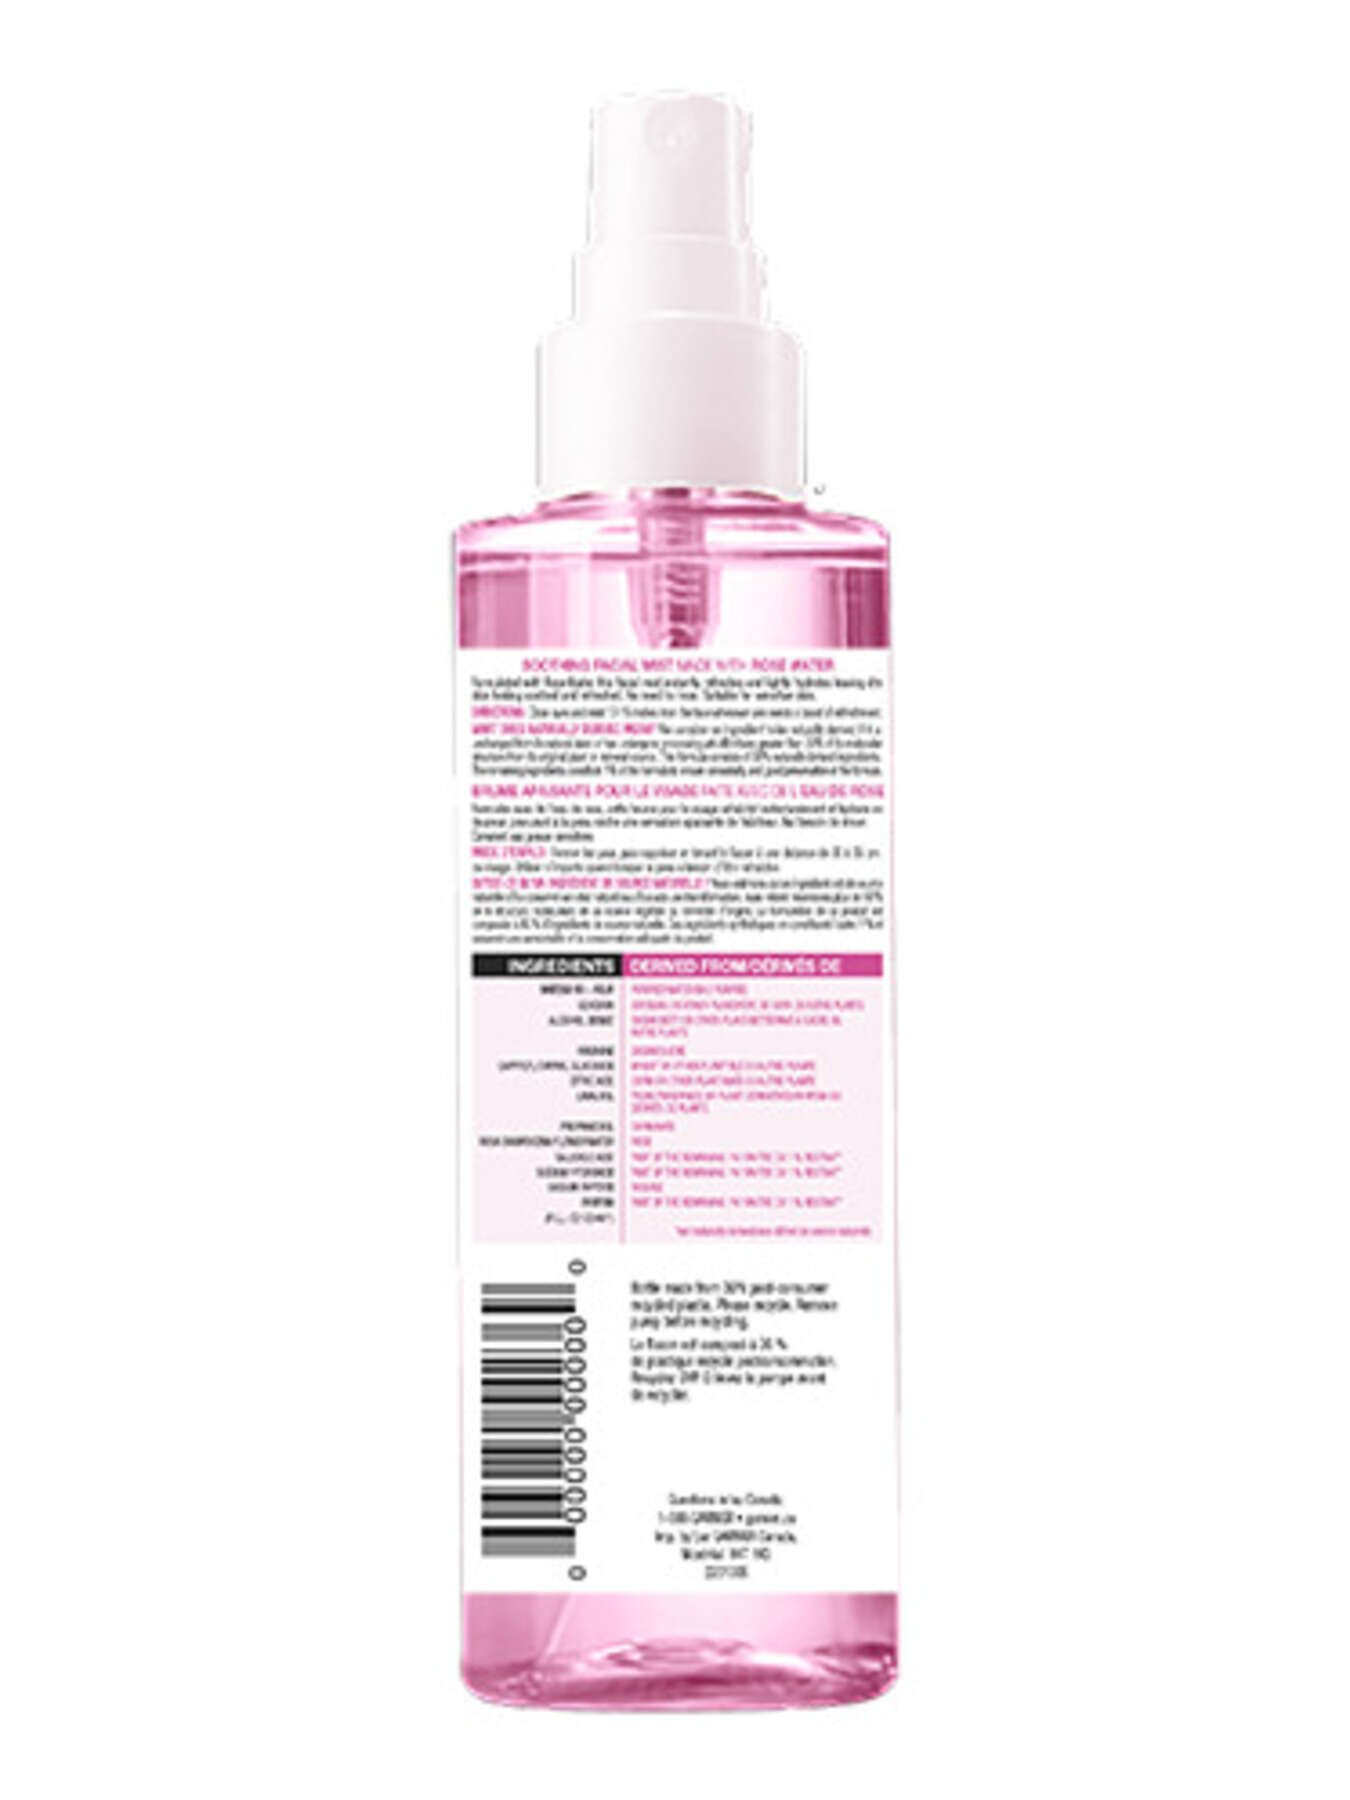 garnier face spray skinactive naturals soothing facial mist with rose water 603084542369 t2